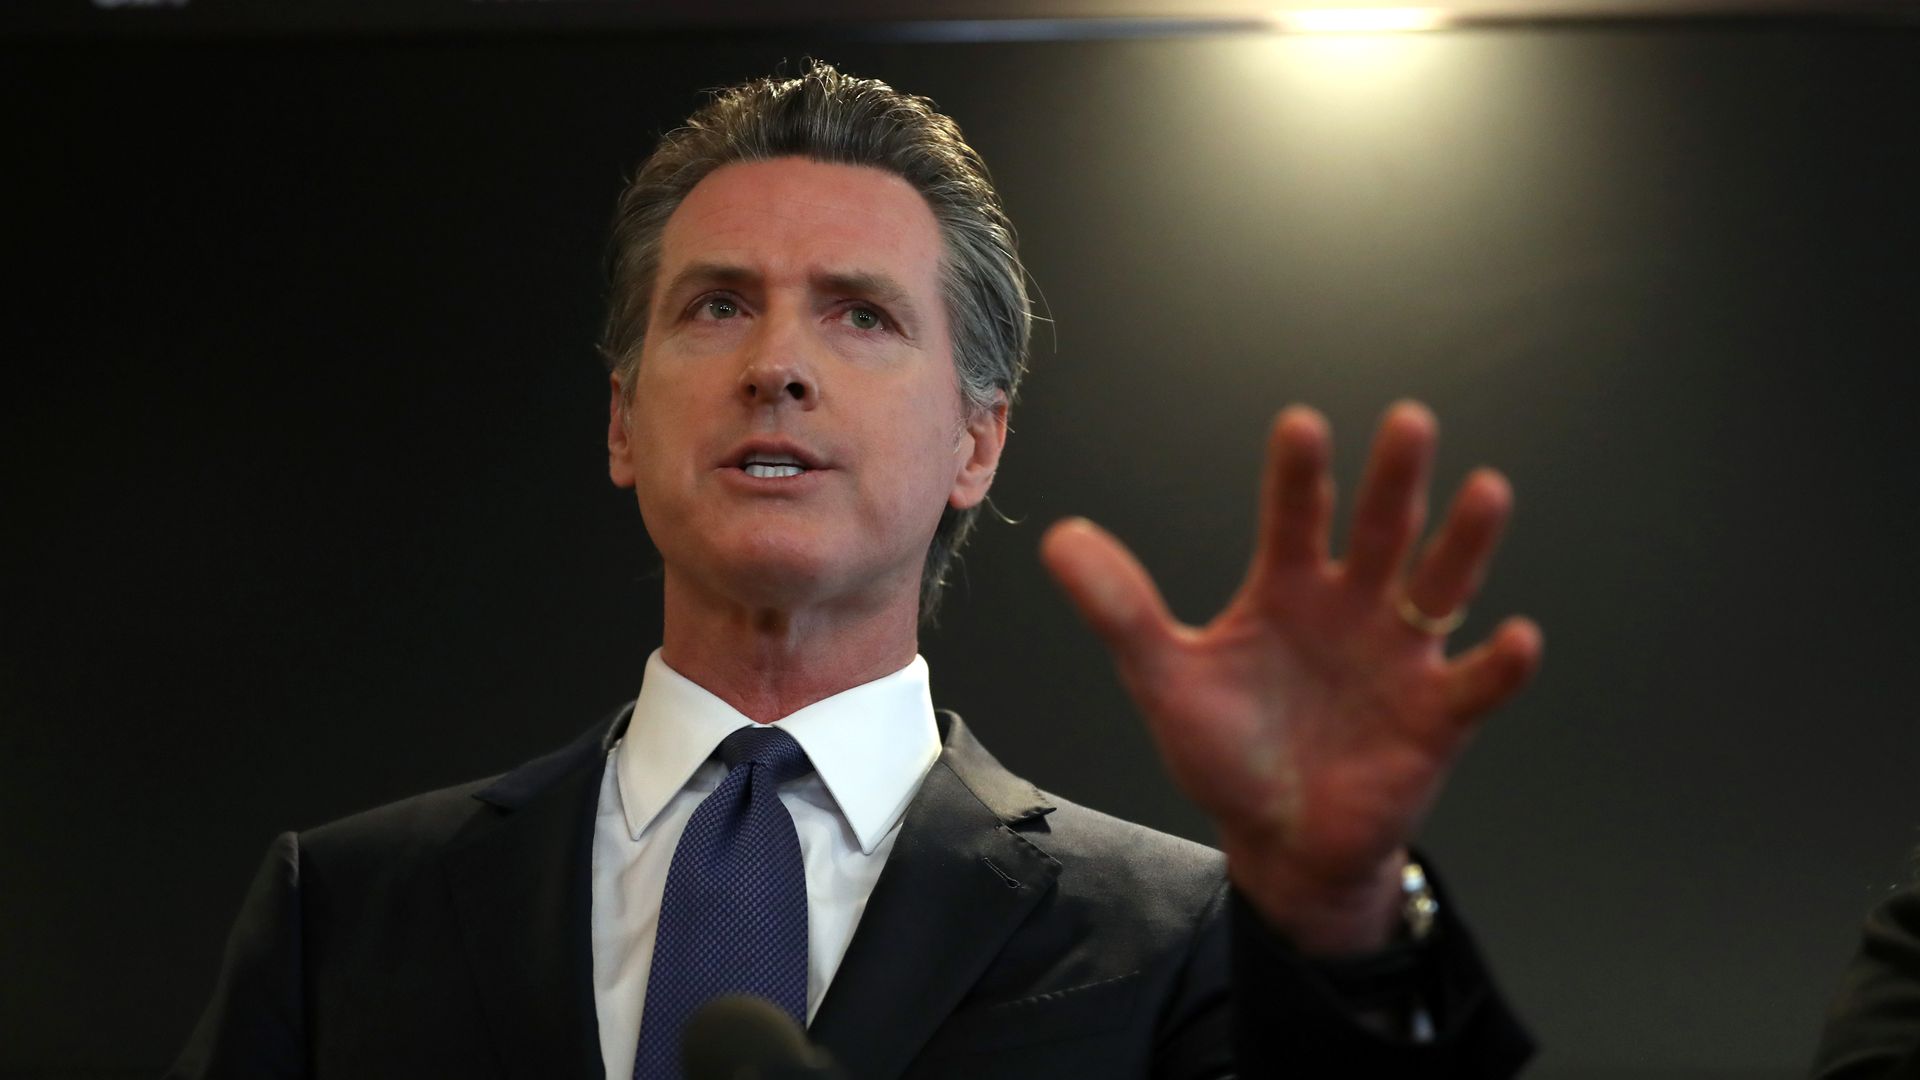 California Governor Gavin Newsom speaking with his hand out